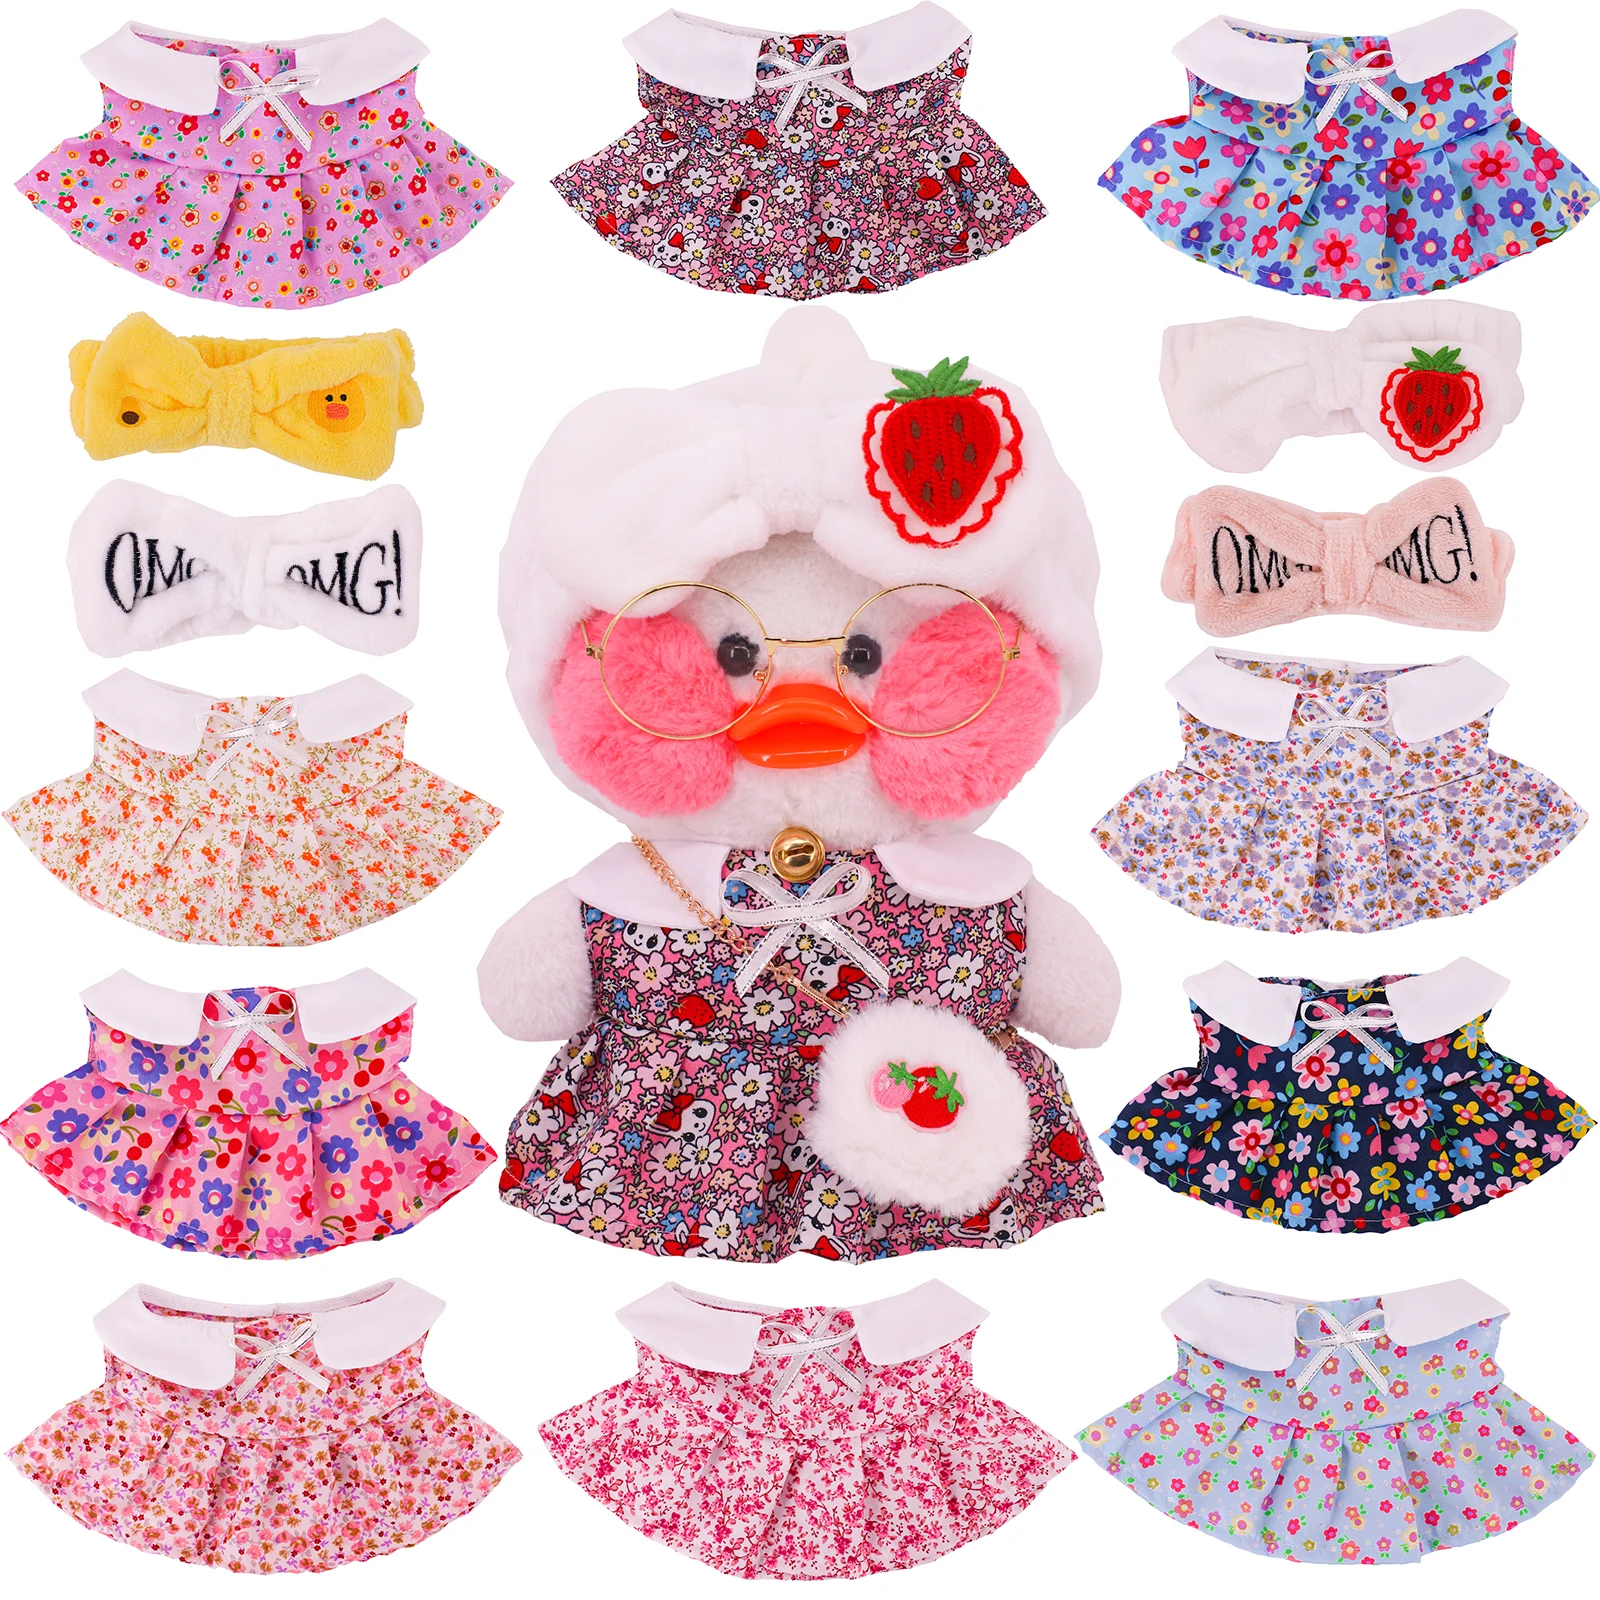 30 Cm Duck Plush Cafe Lalafafan Clothes Original Design Duck Clothes Dress Sweater for 20-30cm Plush Animal Doll Girls Toy